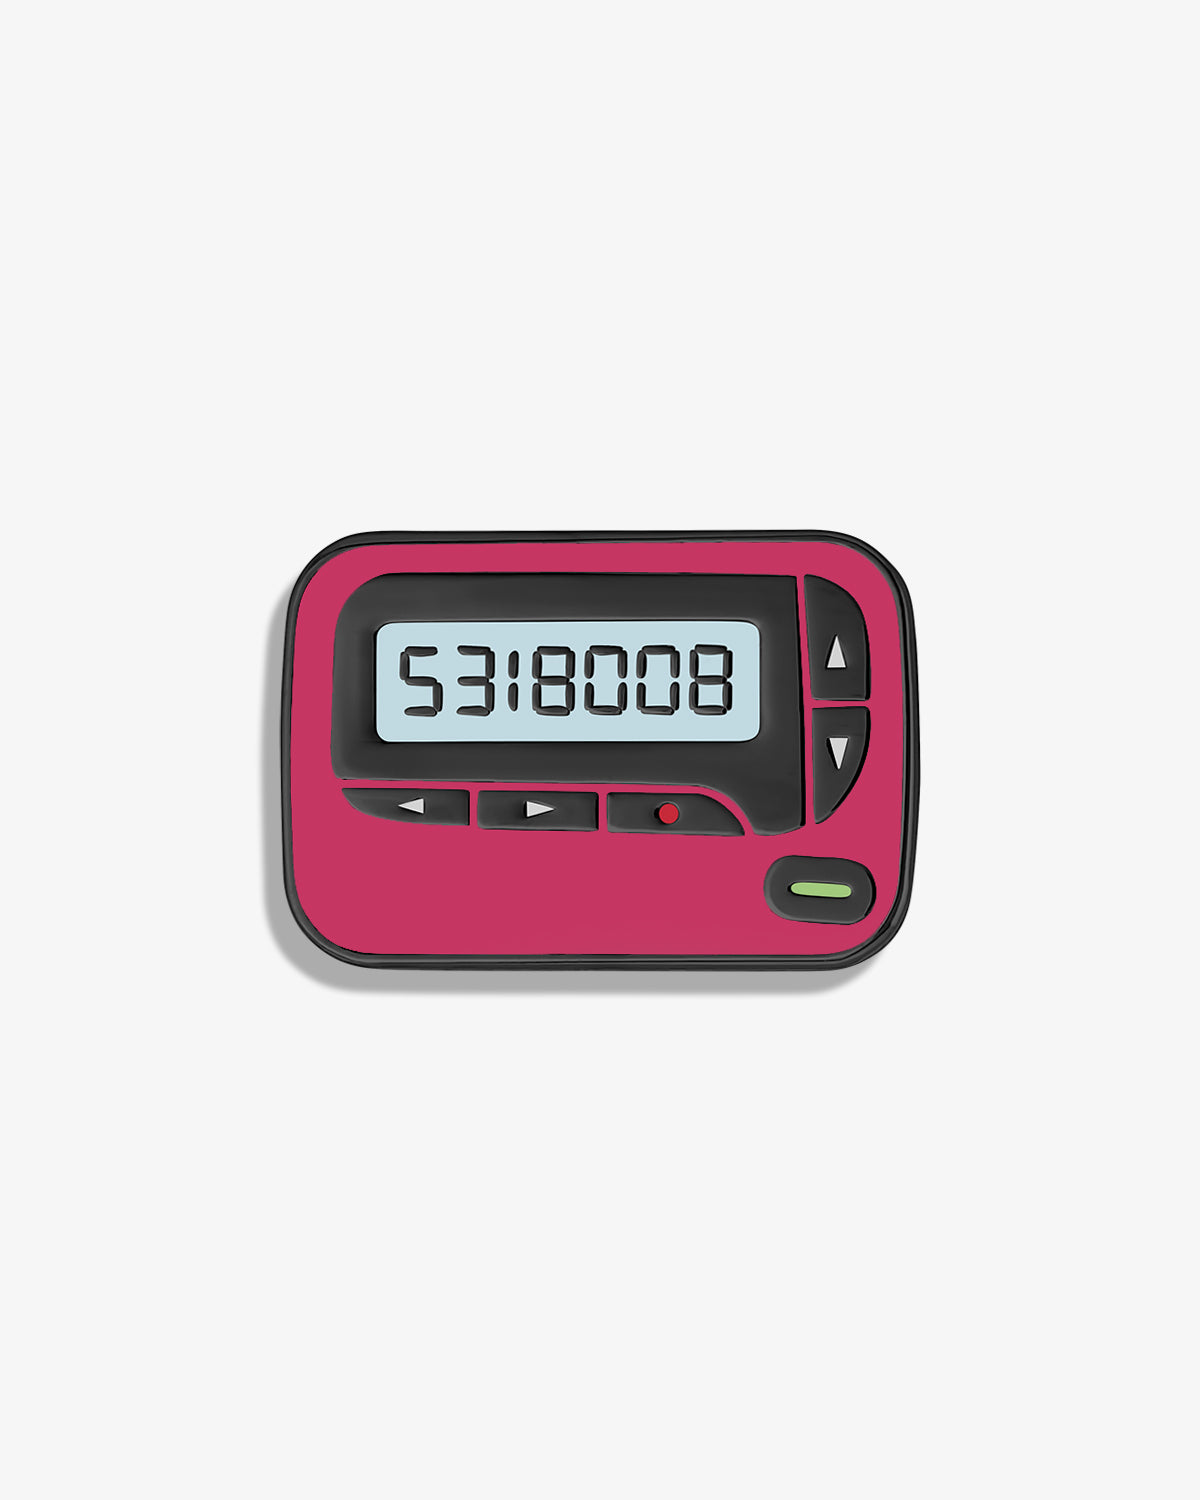 Call Me, Beep Me (Pager)  Medical Pin by V Coterie